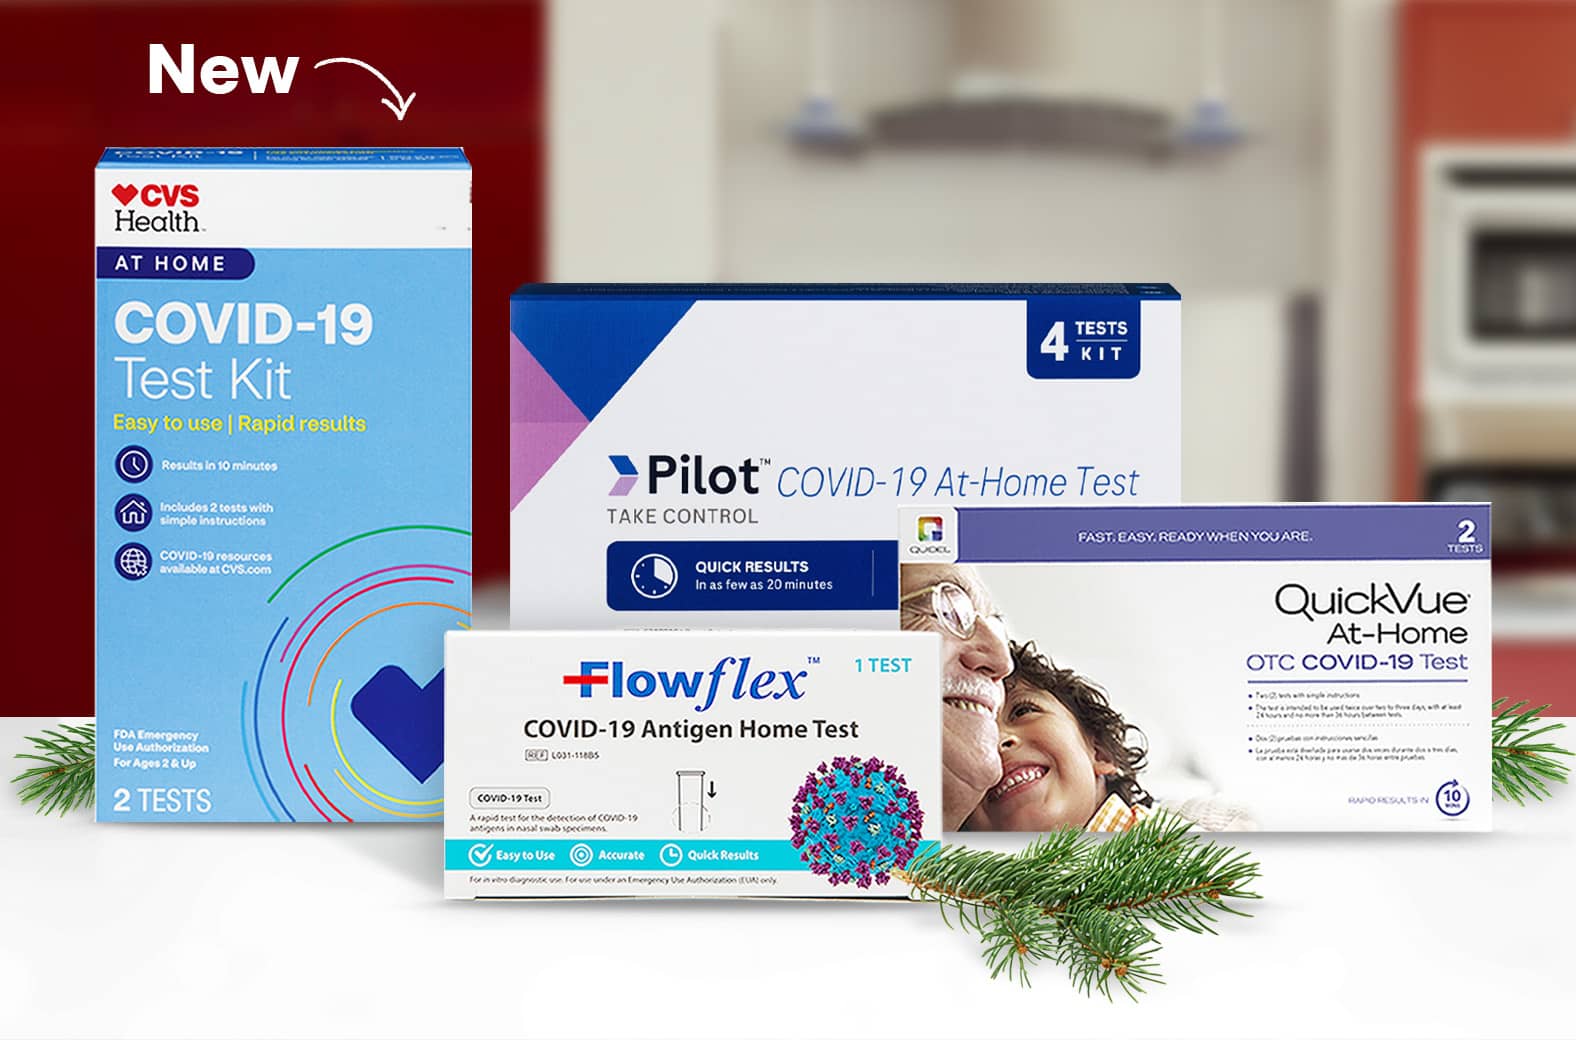 New, CVS Health COVID-19 Test Kit, with Flowflex, Pilot, QuickVue at-home test kits